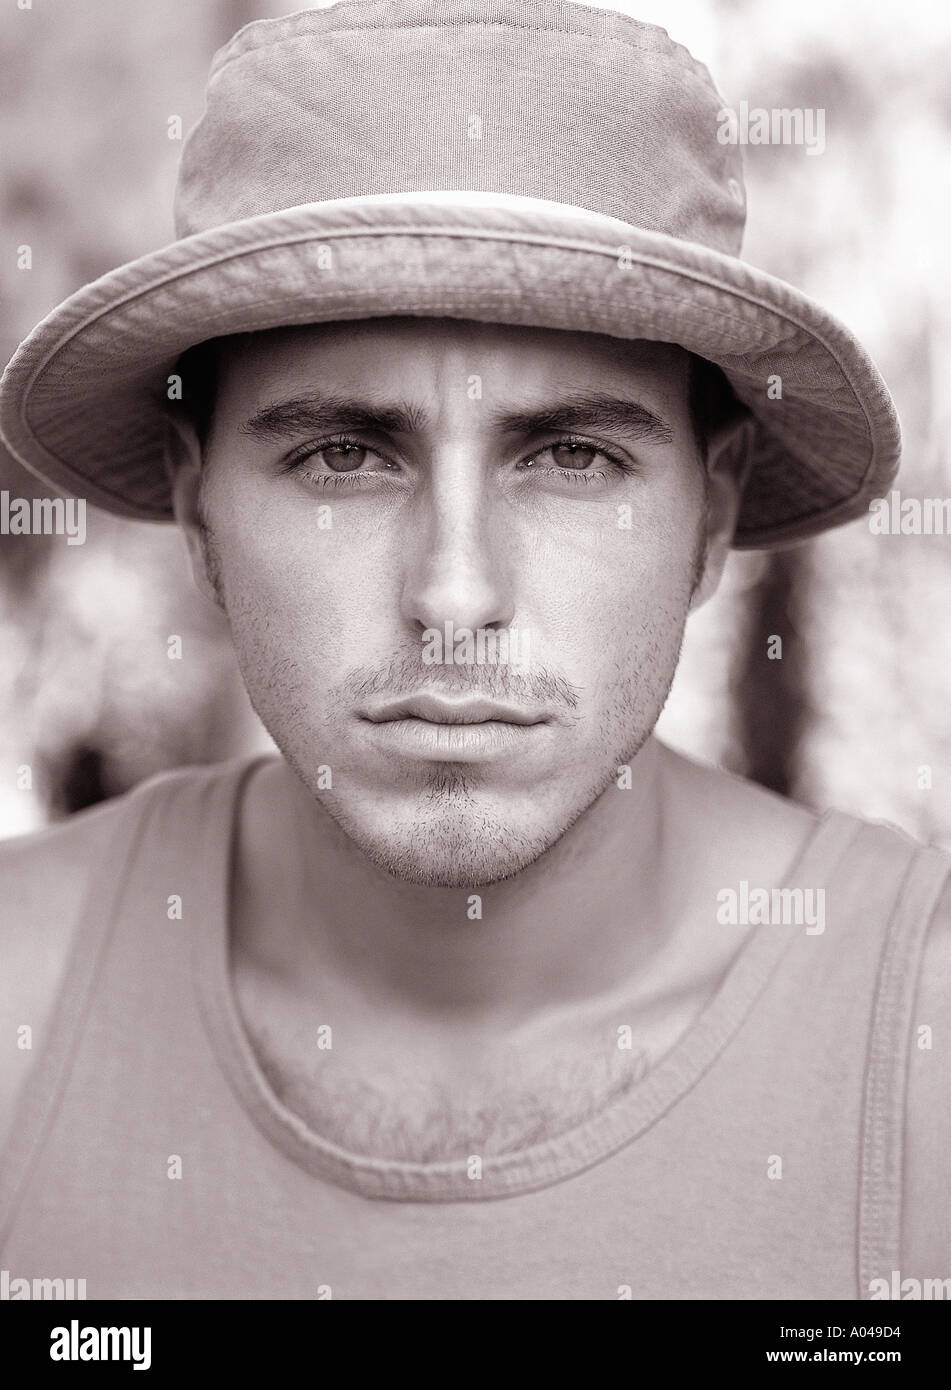 Portrait of a young man facing the camera wearing a sun hat Stock Photo